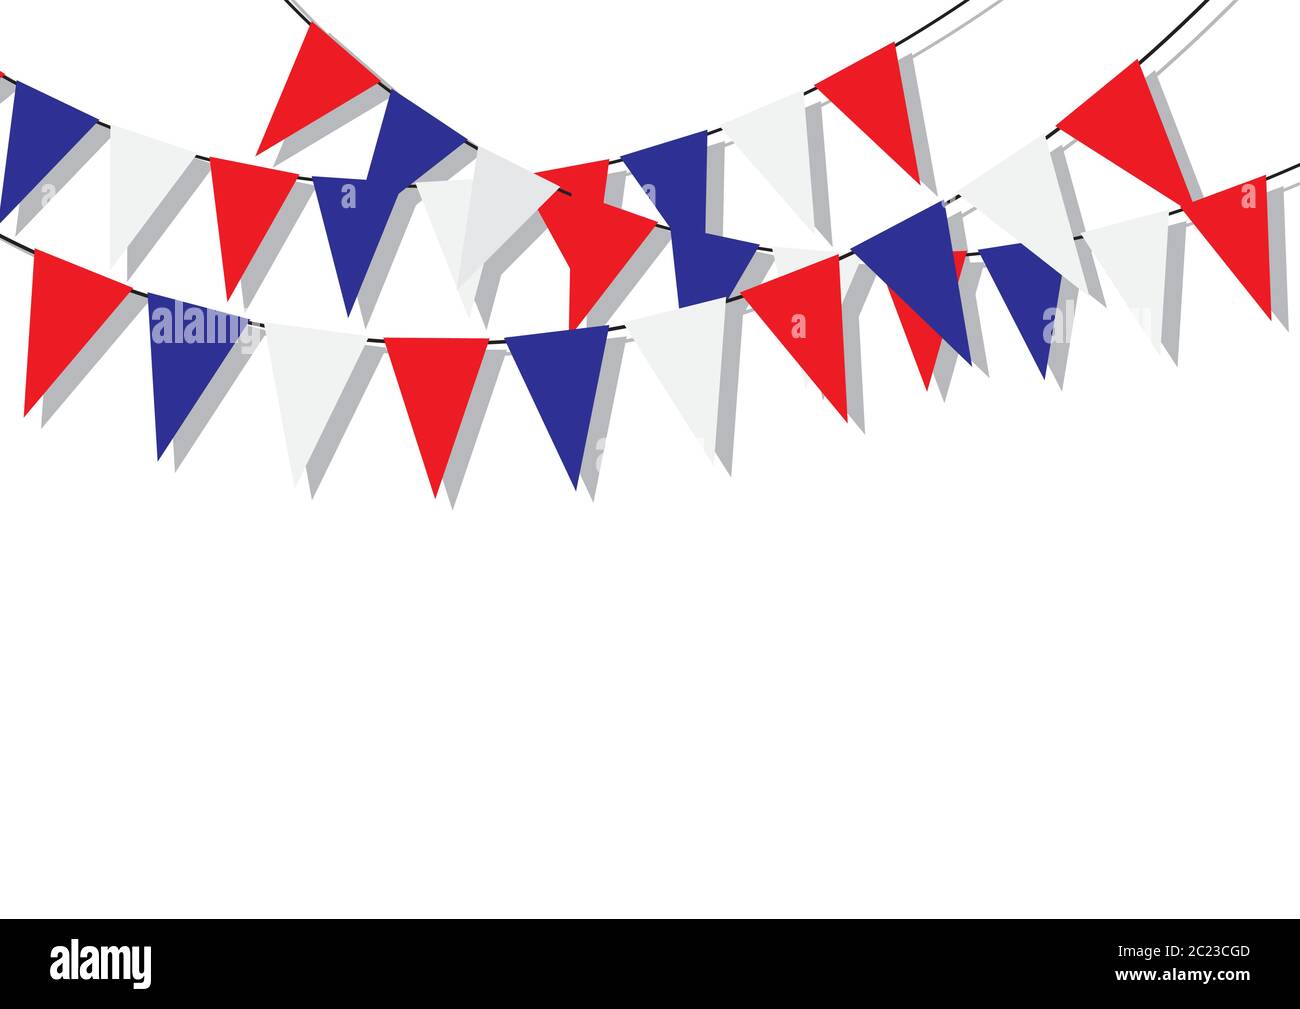 Red White Blue Bunting Flag Union Jack Street Party Royal Decorations 10m 32feet 